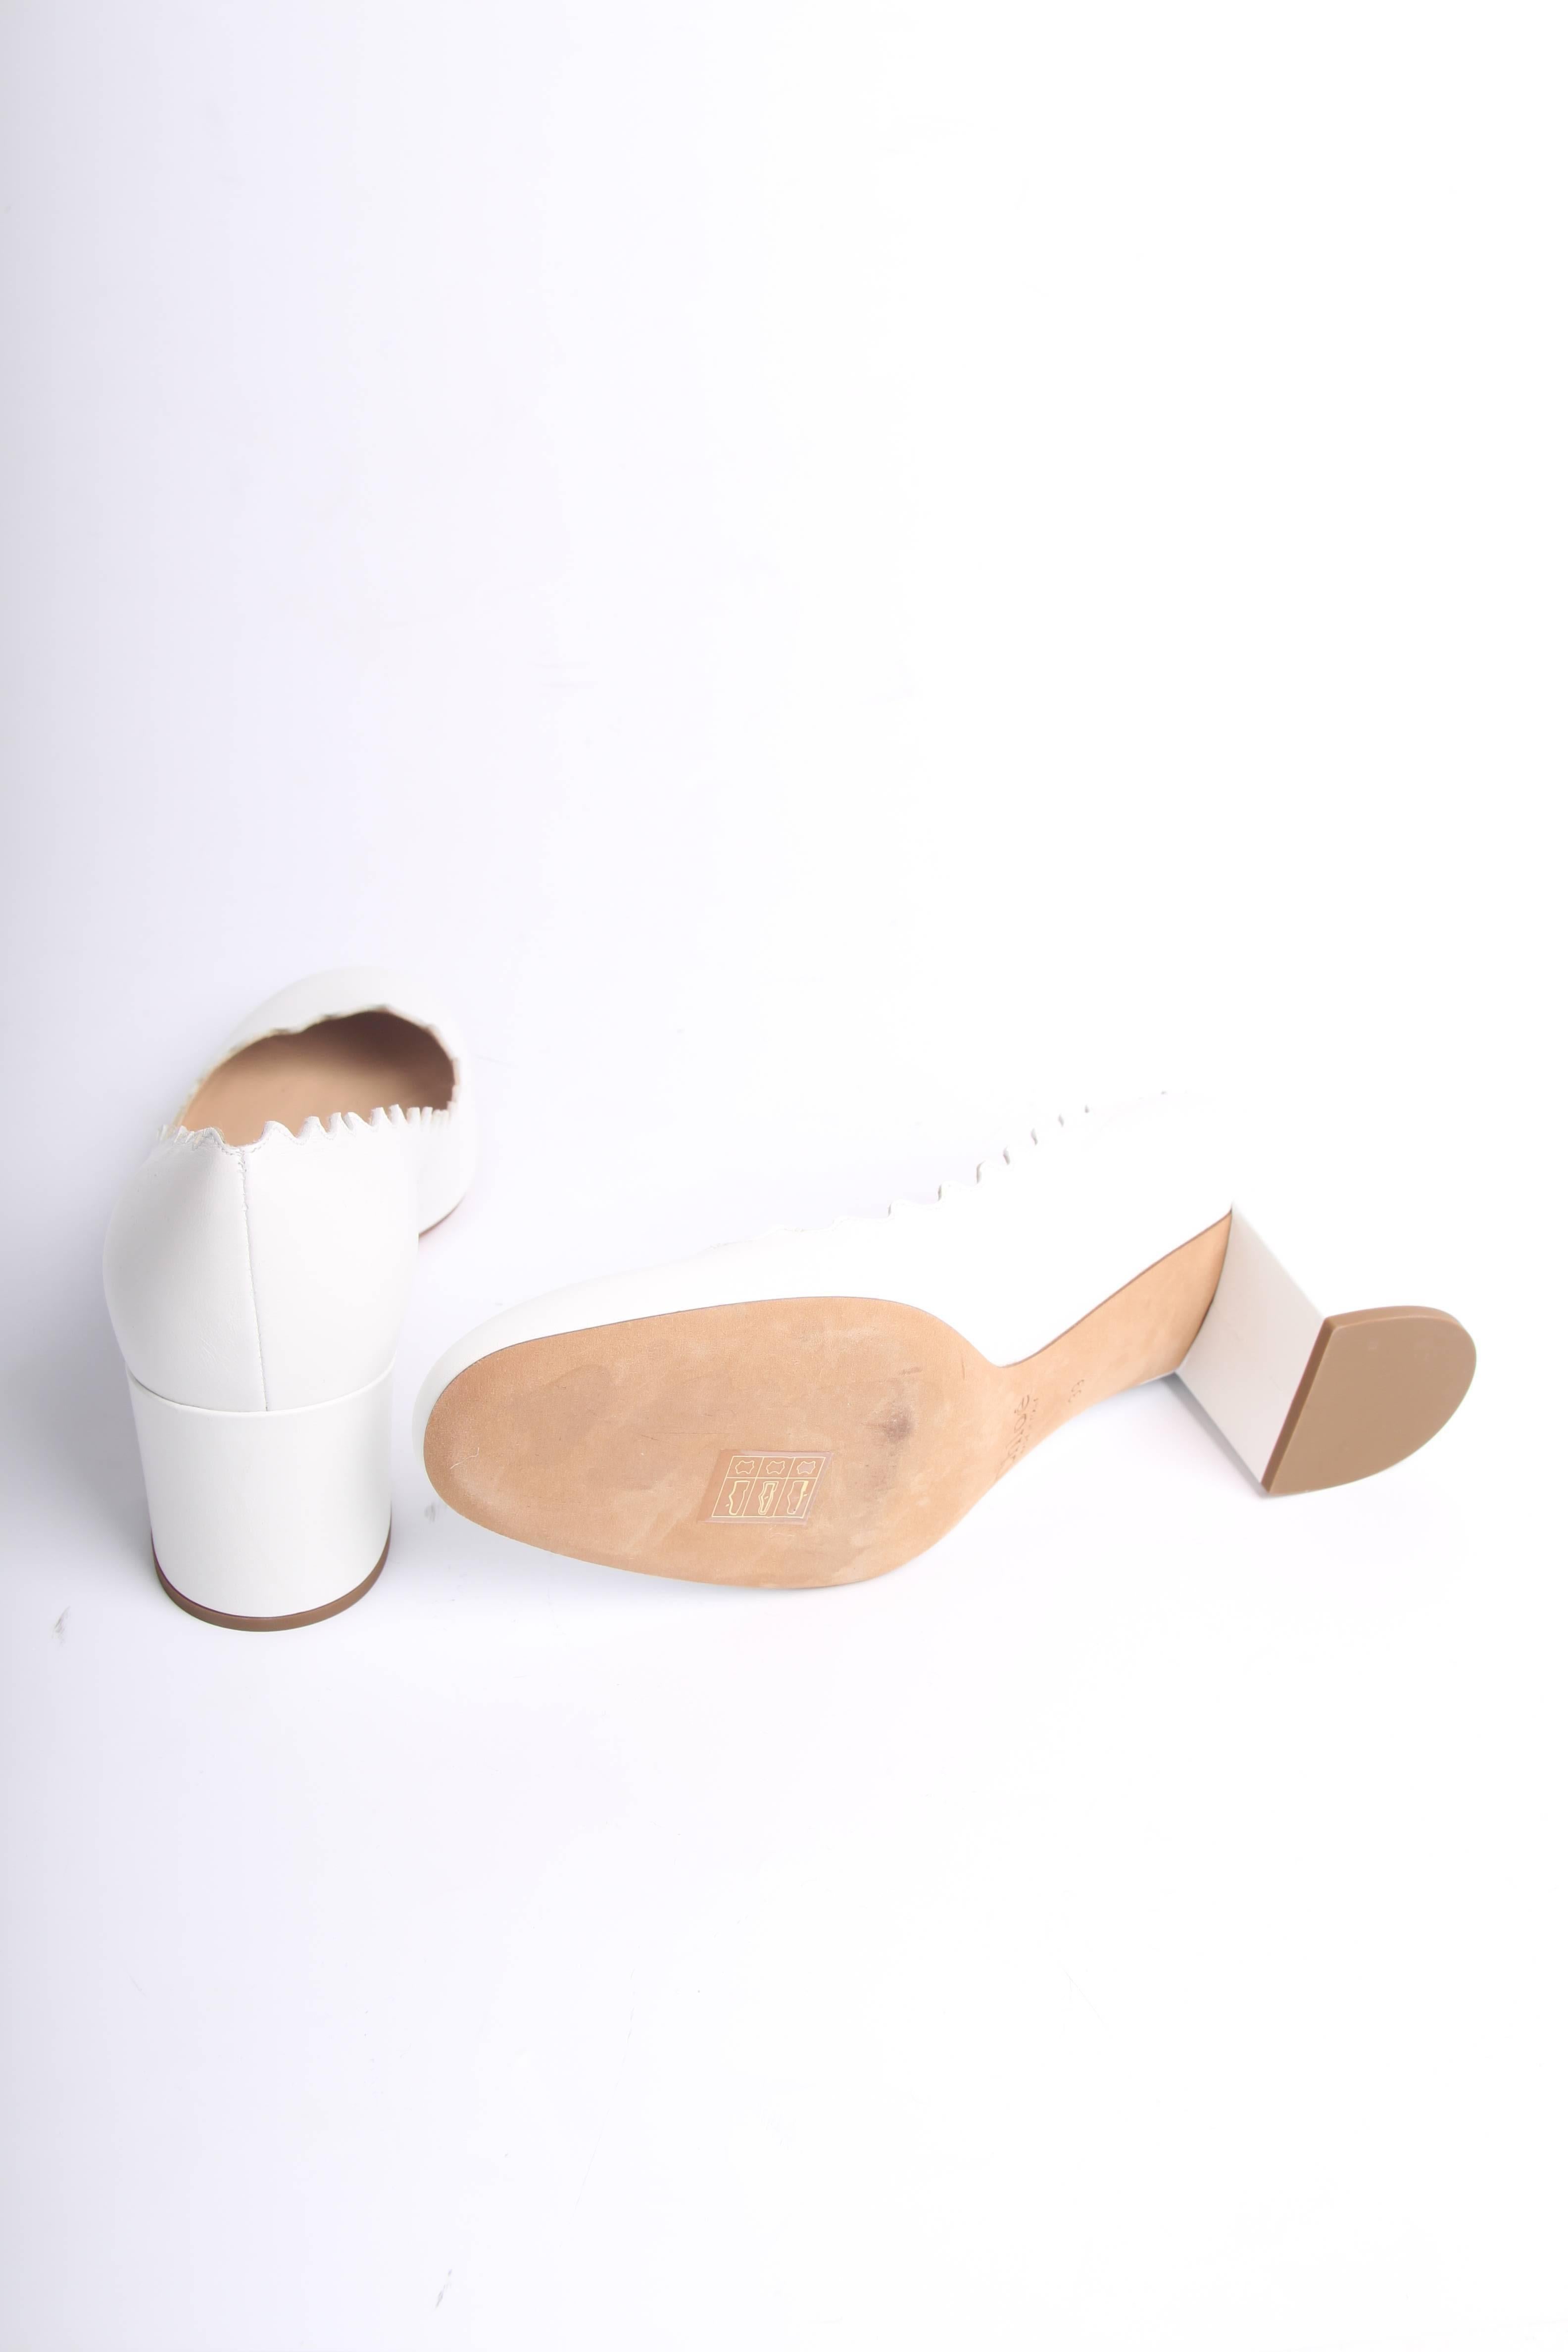 These cuties by Chloé wear the name Lauren.

White leather pumps with block heels and a scalloped trim. Fully lined with nude coloured leather, a logo on the insole. The heel measures 6 centimeters. A leather outsole.

In perfect condition, have not